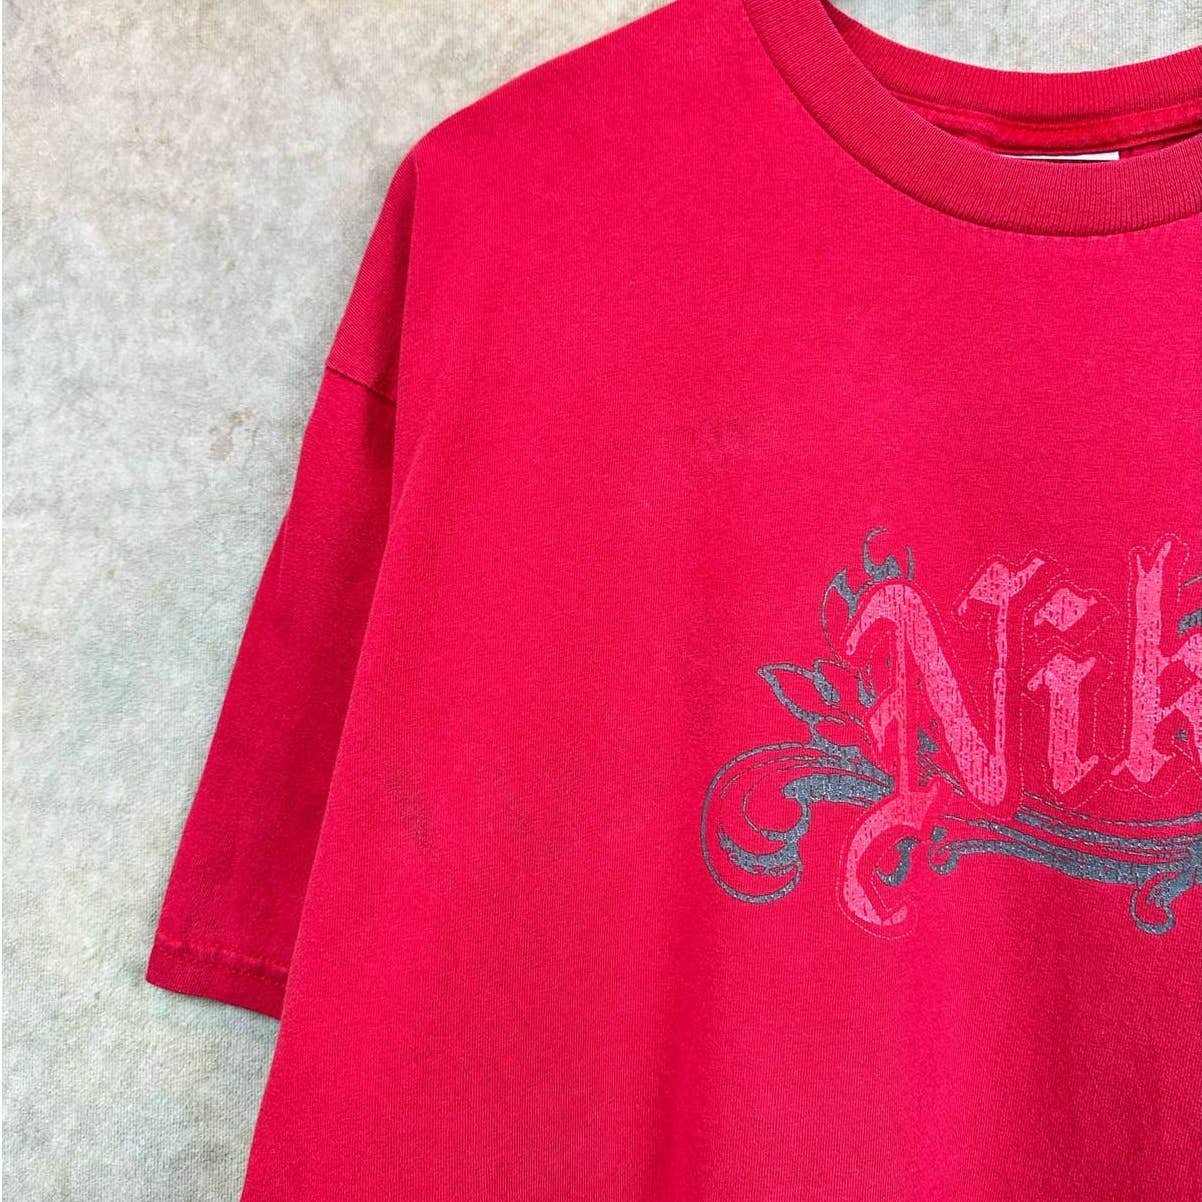 Vintage Nike Spell-out T Shirt